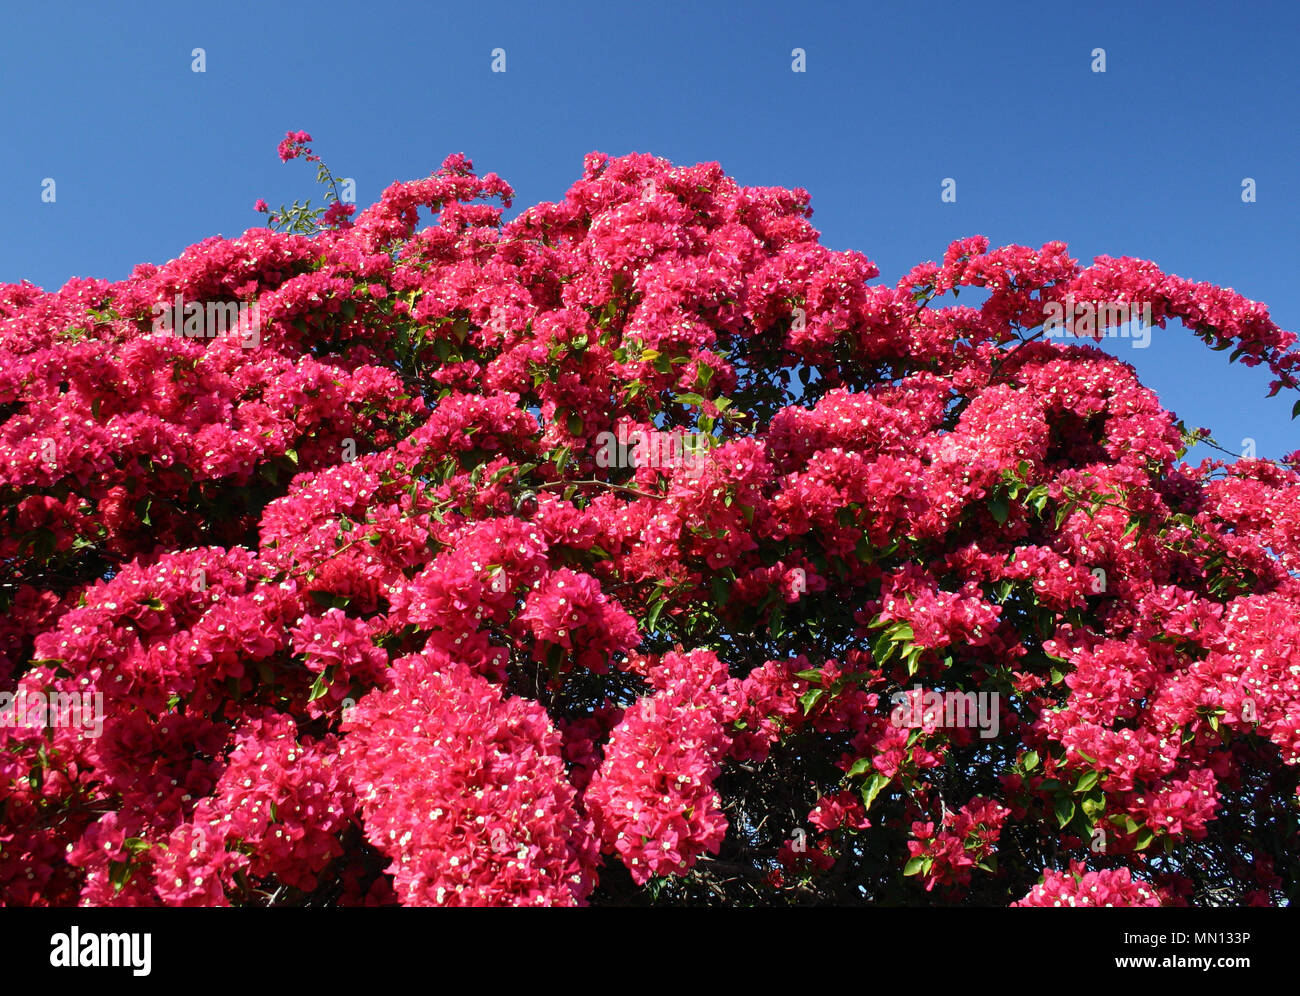 RED BOUGAINVILLEA FLOWERS, NEW SOUTH WALES, AUSTRALIA. Stock Photo